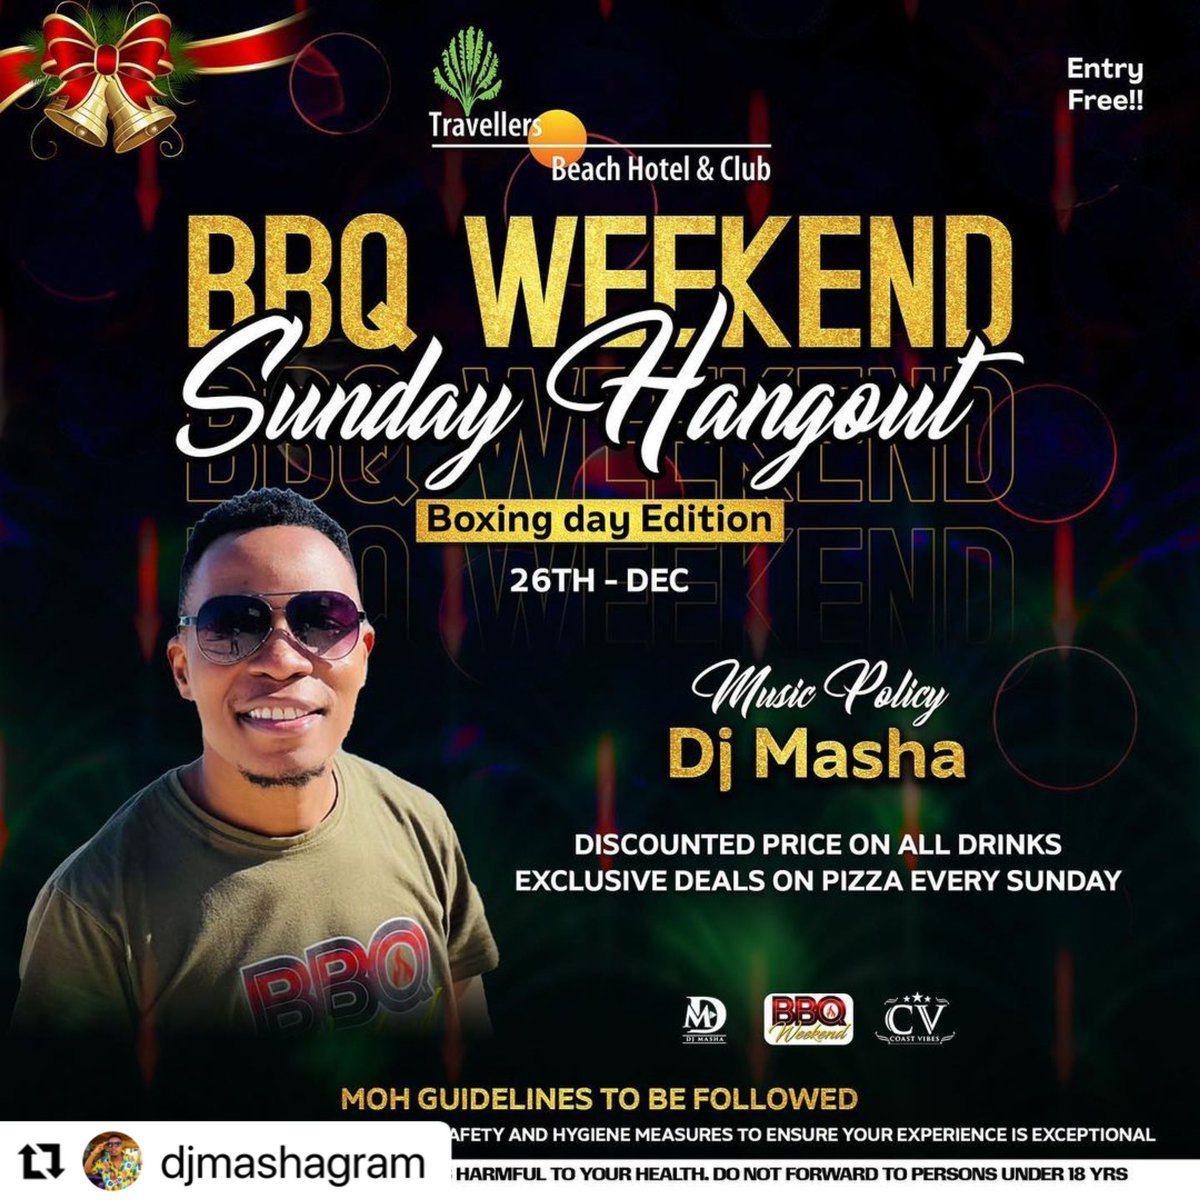 #Repost @djmashakenya with @make_repost ・・・ Boxing Day at the beachside. 🏝🏝Come through @travellersbhc and have an amazing Barbecue Experience. ♨️🍗 Entry is Free!! ⛱ #BarbecueWeekend #Events254 #254fashion #254publicity #IgersKenya #MagicalKenya #TembeaKenya #Weekend